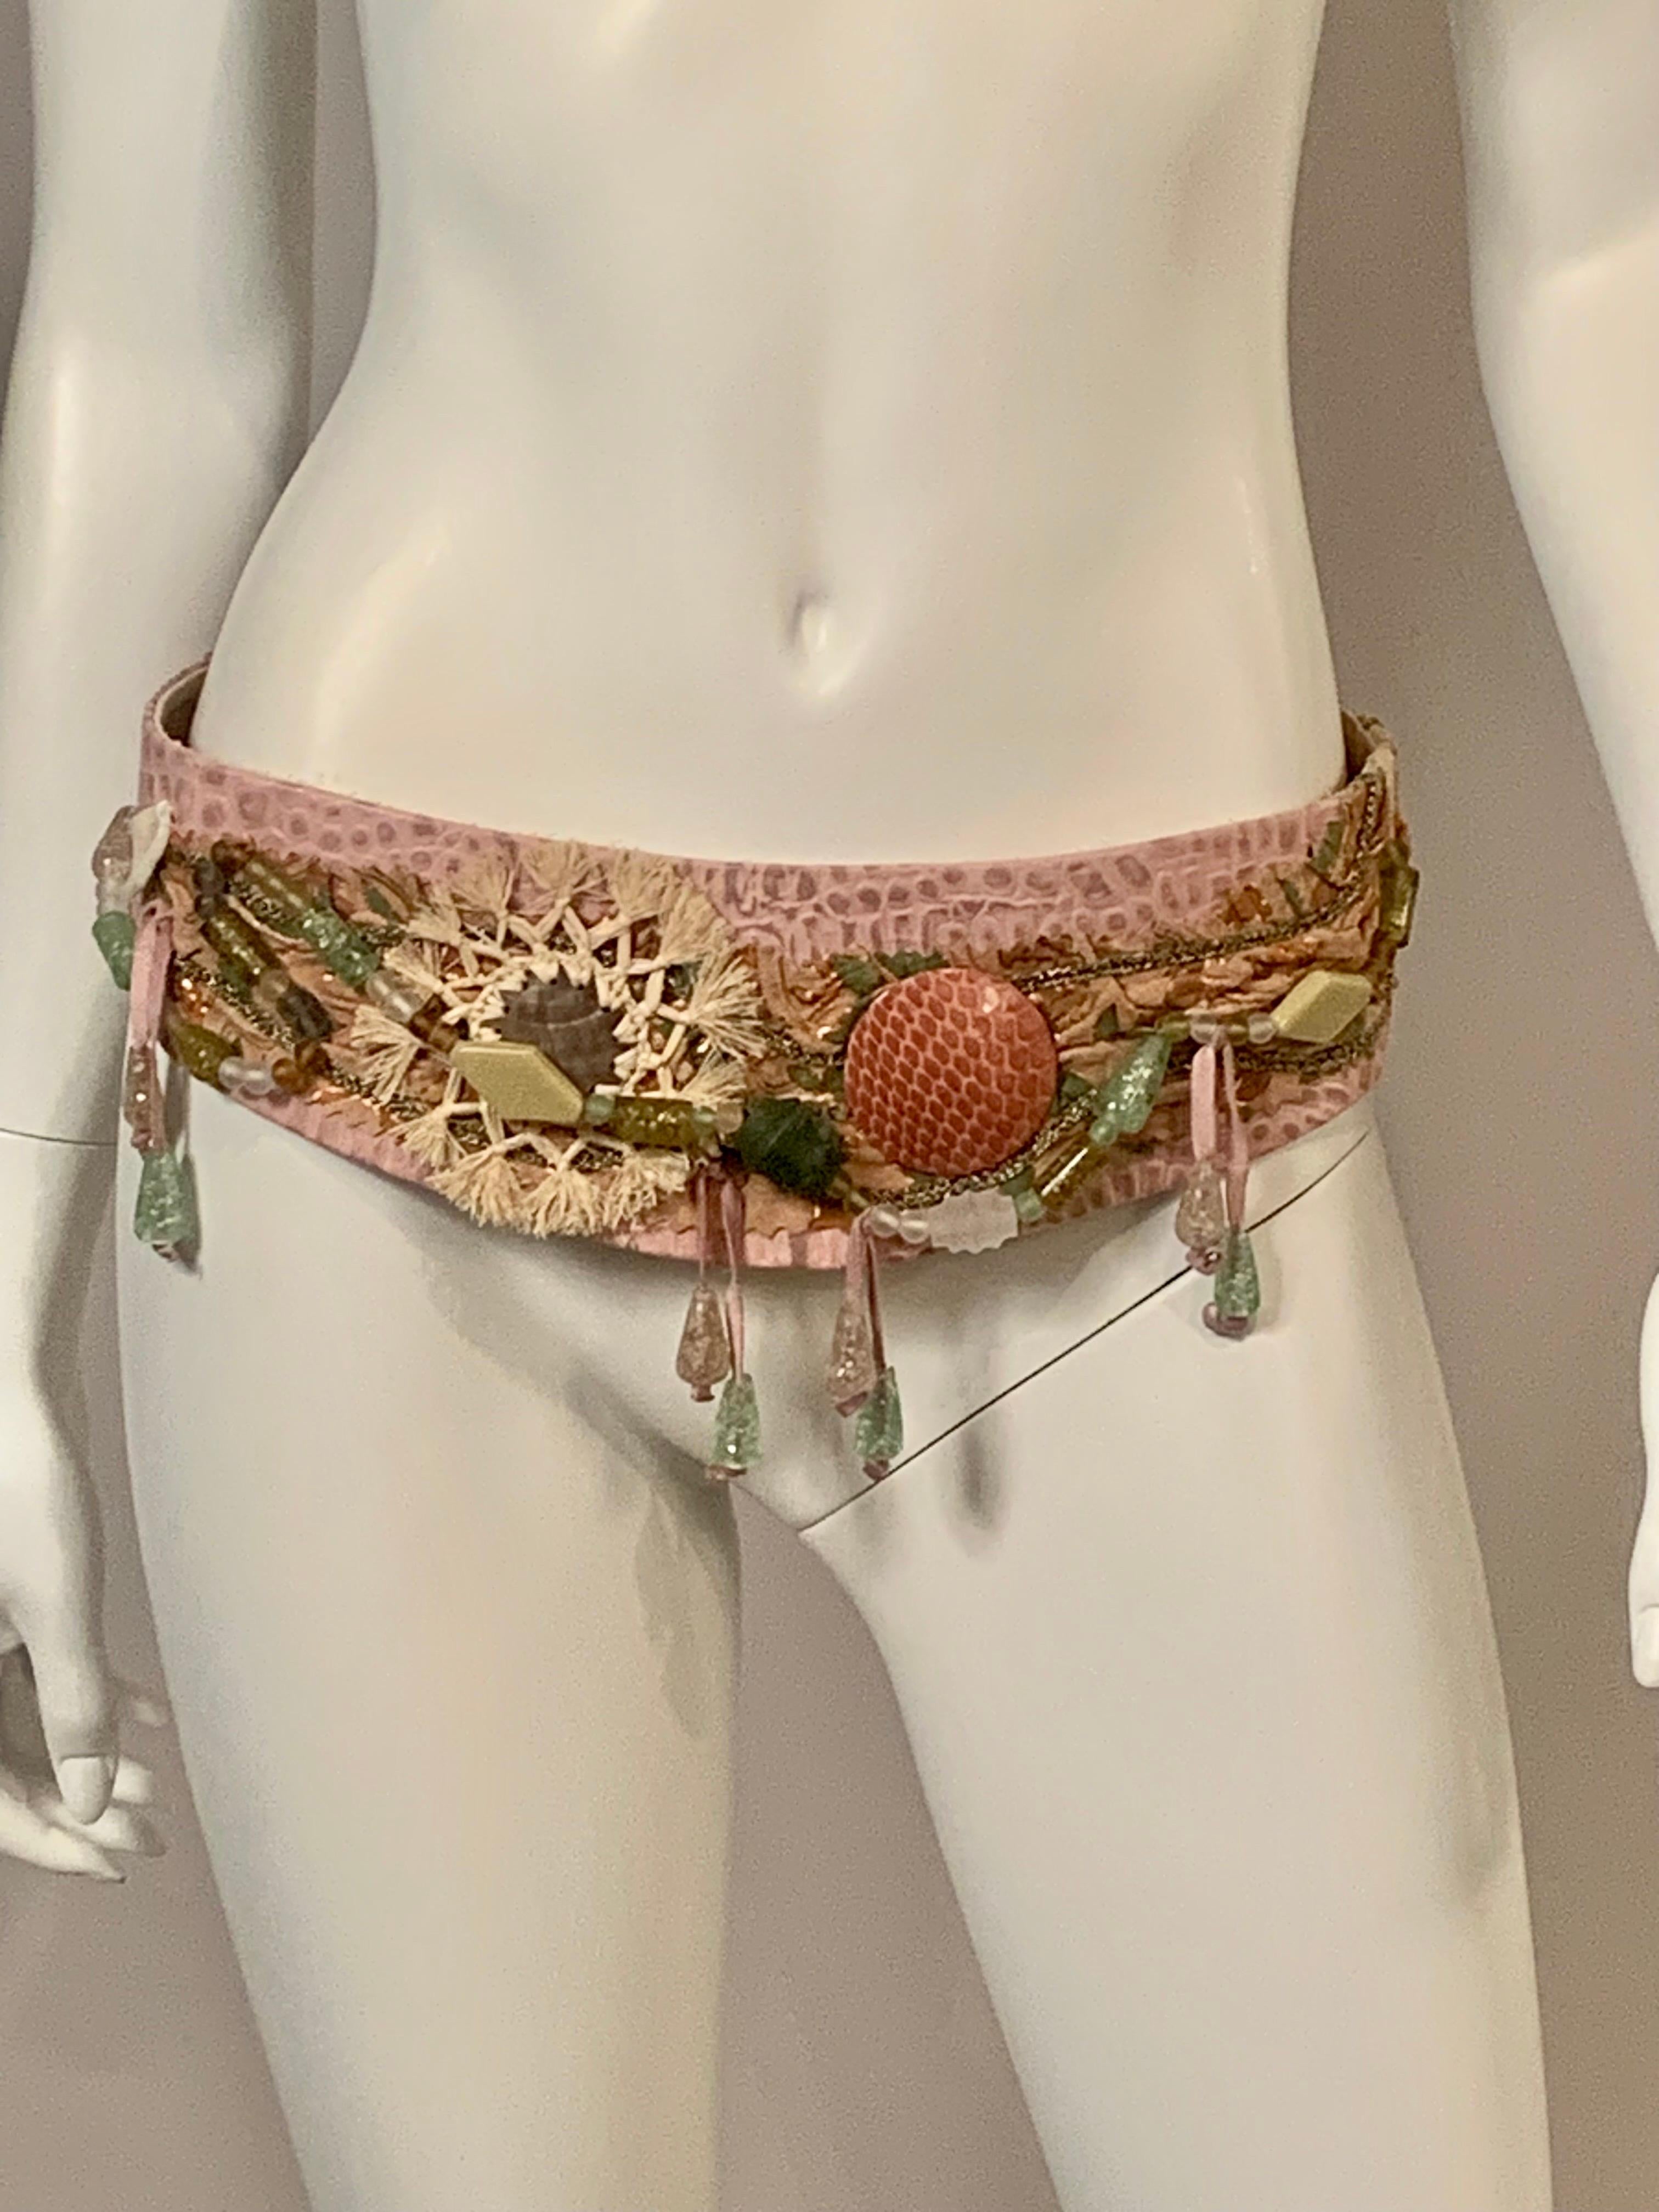 An amazing belt in the rich hippie style of the 1970's is made from pink faux alligator or  stamped leather and pink suede with a pink snakeskin disk and a shell and straw ornament.  In addition there are strands of glass beads, beads dangling from